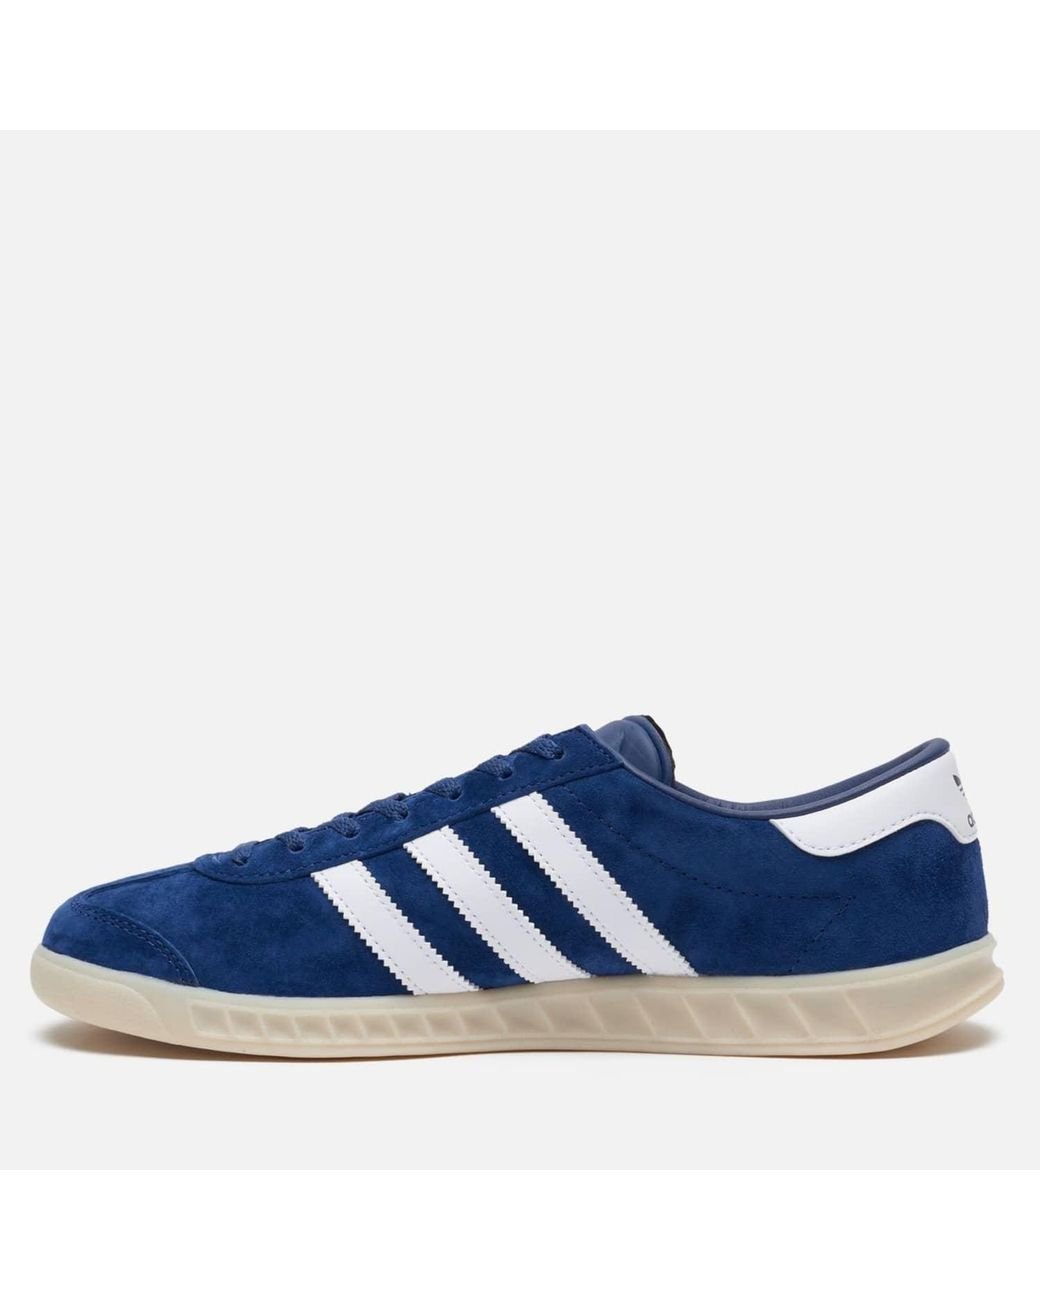 adidas Suede Hamburg Lace-up Sneakers in Blue for Men - Save ...